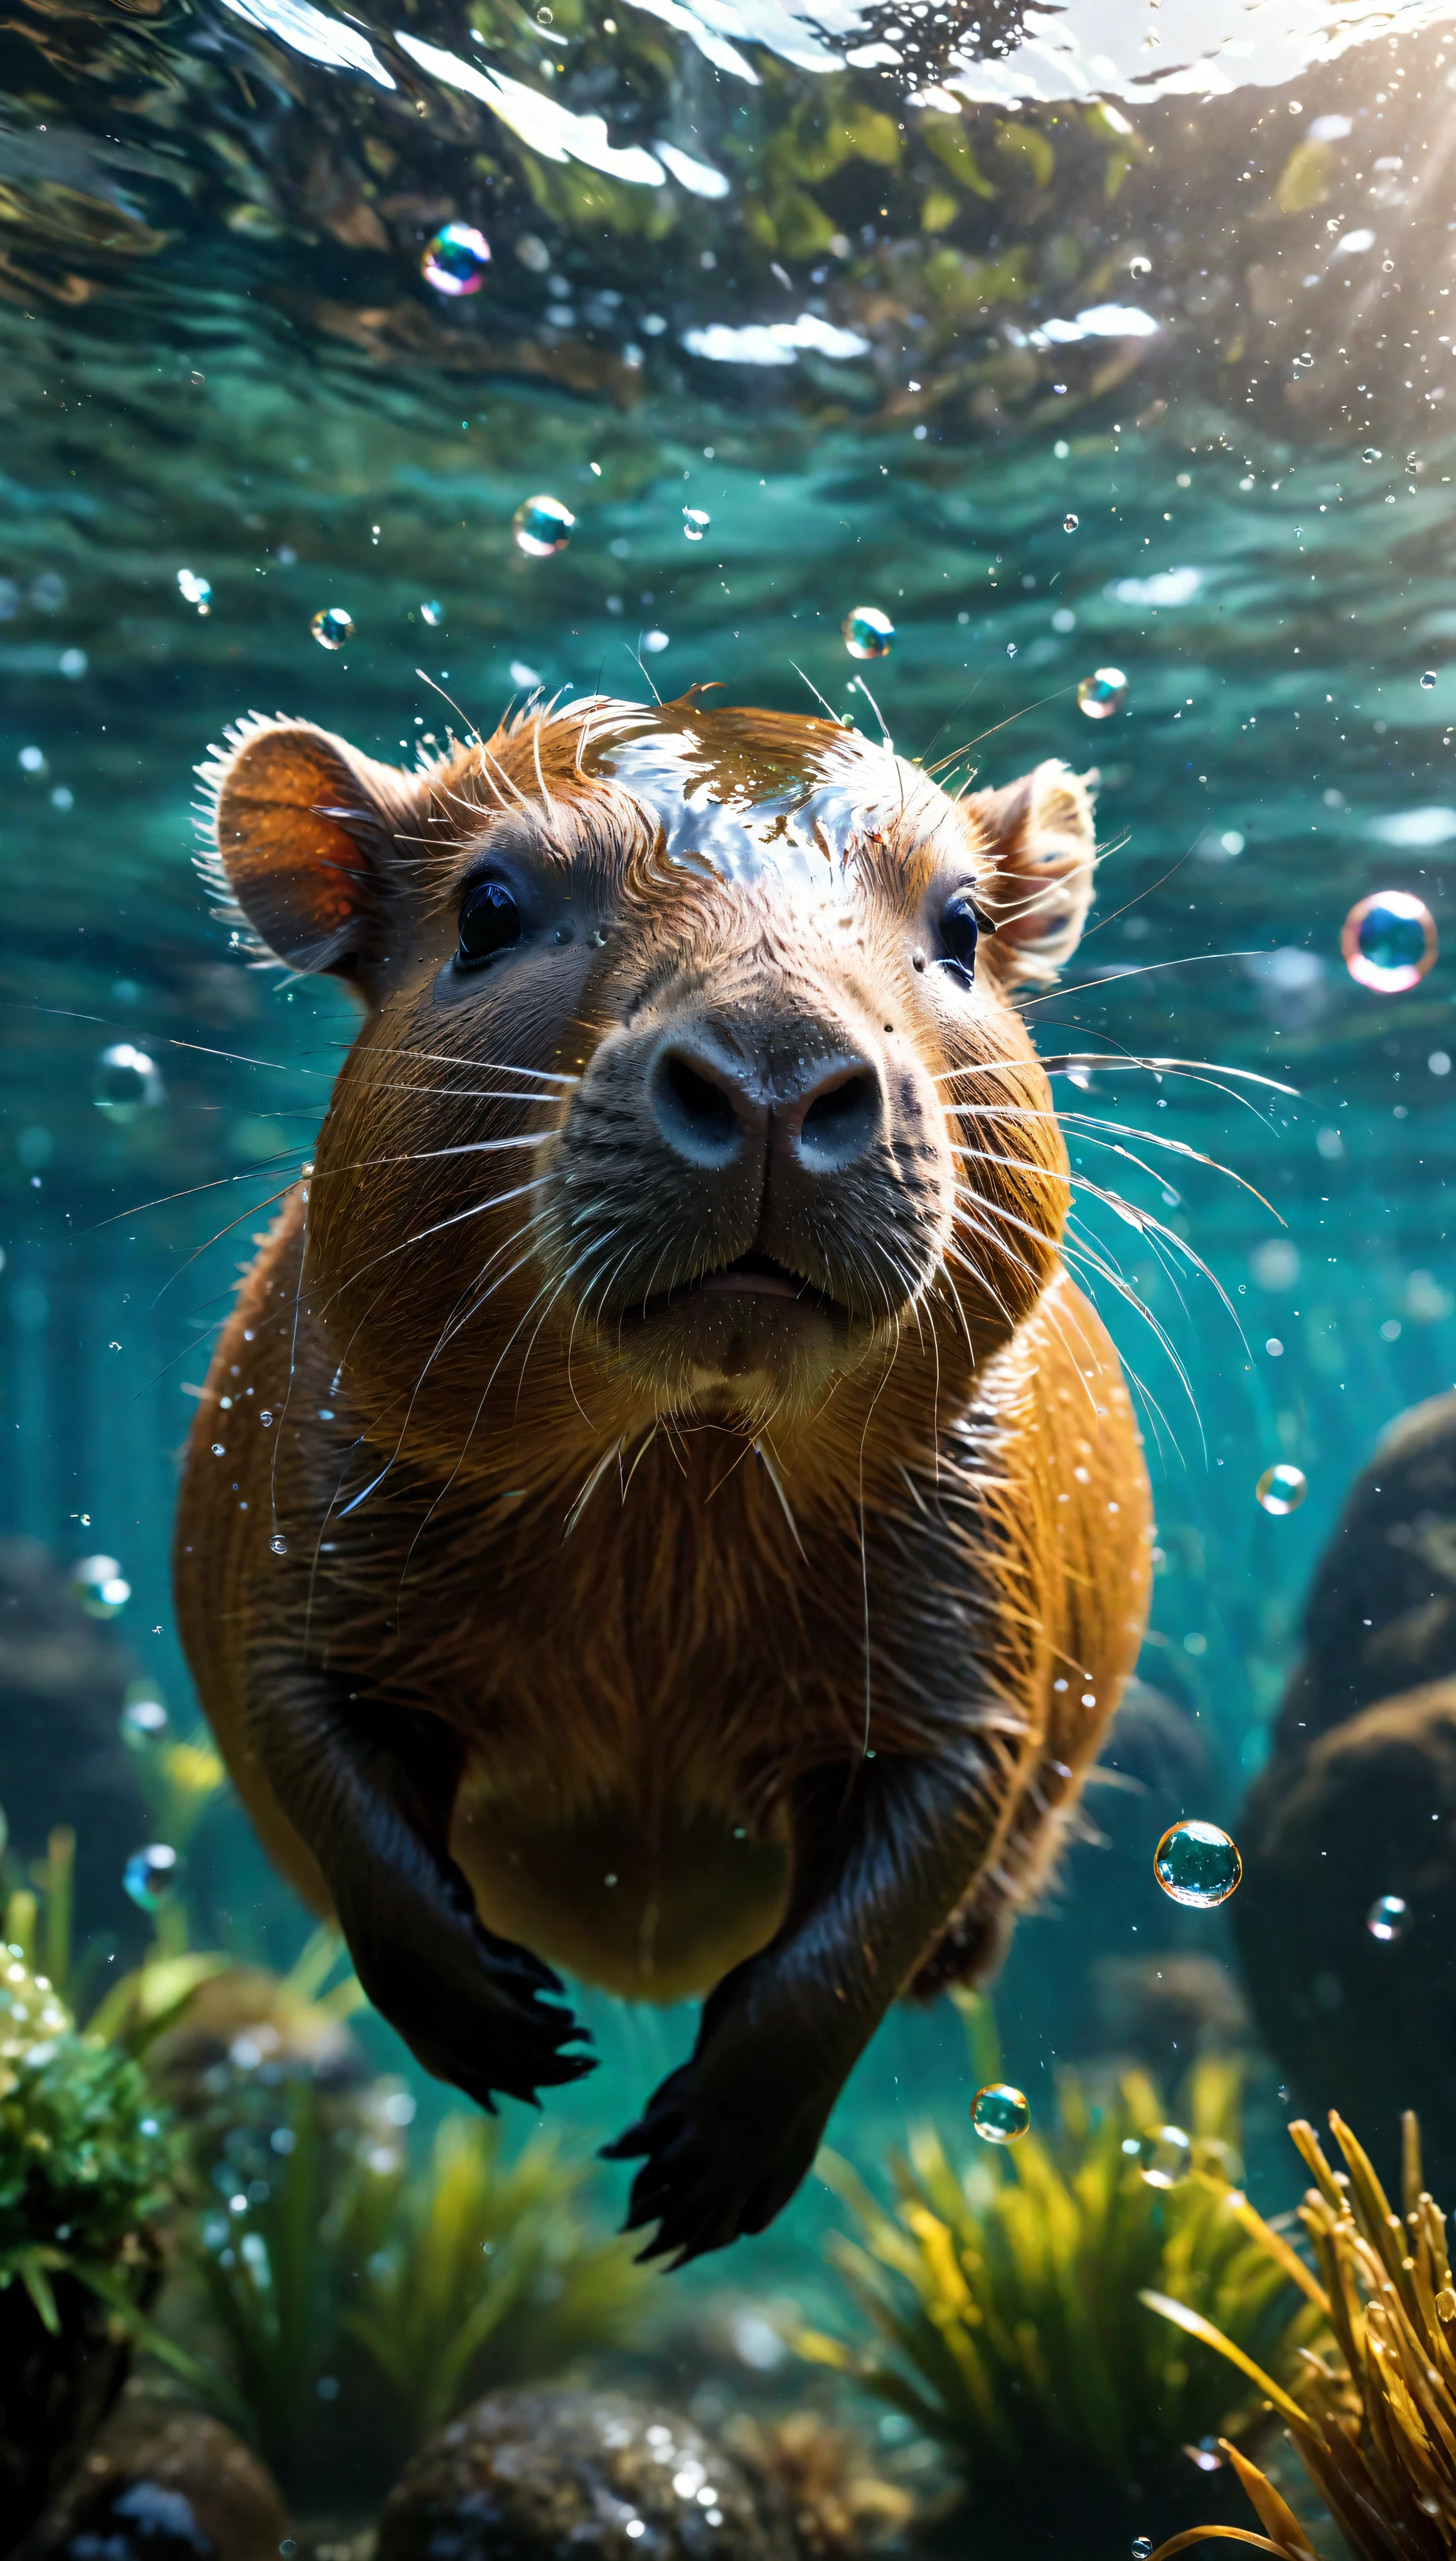 ((Masterpiece in maximum 16K resolution):1.6),((soft_color_photograpy:)1.5), ((Ultra-Detailed):1.4),((Movie-like still images and dynamic angles):1.3). | (Macro shot cinematic photo of exotic Capybara underwater), (a Capybara swimming underwater), (water bubbles), (macro lens), (exotic animal), (cute), (delightful atmosphere), (aesthetic photography style), (visual experience),(Realism), (Realistic),award-winning graphics, dark shot, film grain, extremely detailed, Digital Art, rtx, Unreal Engine, scene concept anti glare effect, All captured with sharp focus. | Rendered in ultra-high definition with UHD and retina quality, this masterpiece ensures anatomical correctness and textured skin with super detail. With a focus on high quality and accuracy, this award-winning portrayal captures every nuance in stunning 16k resolution, immersing viewers in its lifelike depiction. | ((perfect_composition, perfect_design, perfect_layout, perfect_detail, ultra_detailed)), ((enhance_all, fix_everything)), More Detail, Enhance.